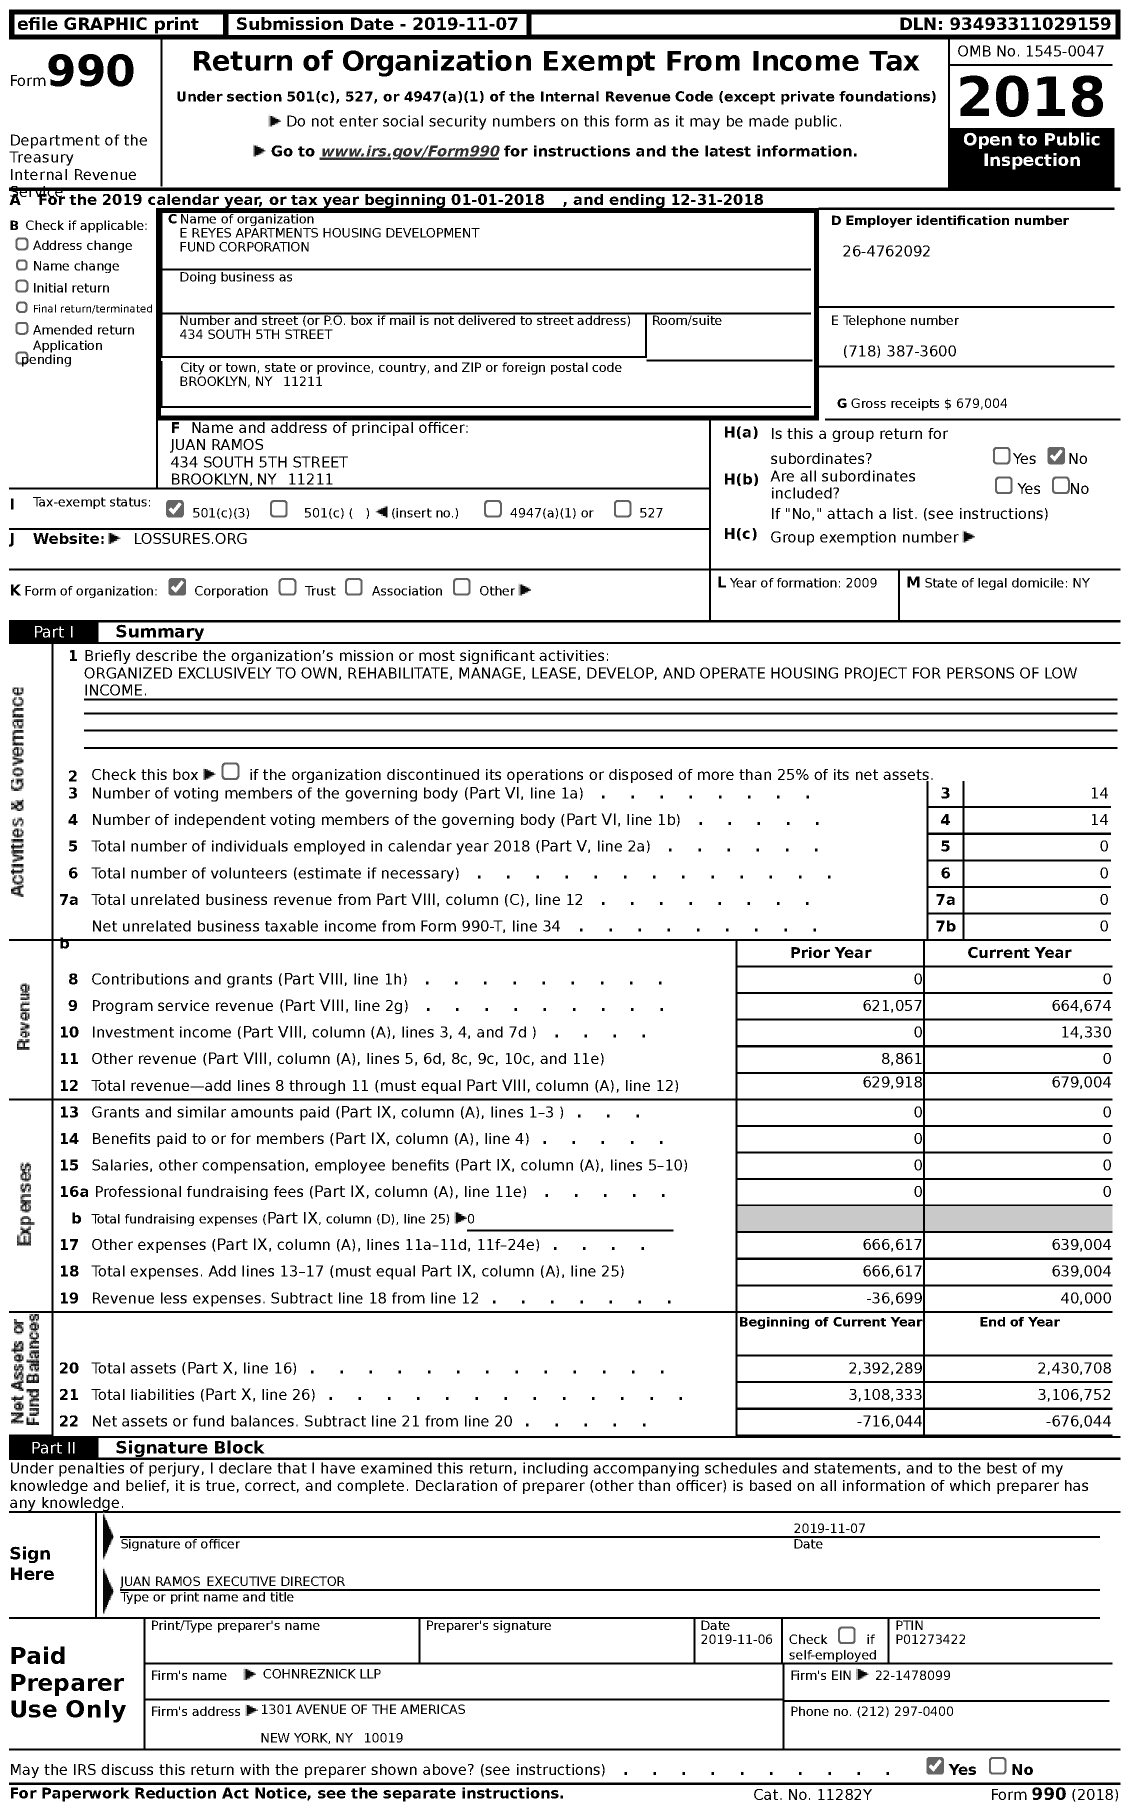 Image of first page of 2018 Form 990 for E Reyes Apartments Housing Development Fund Corporation